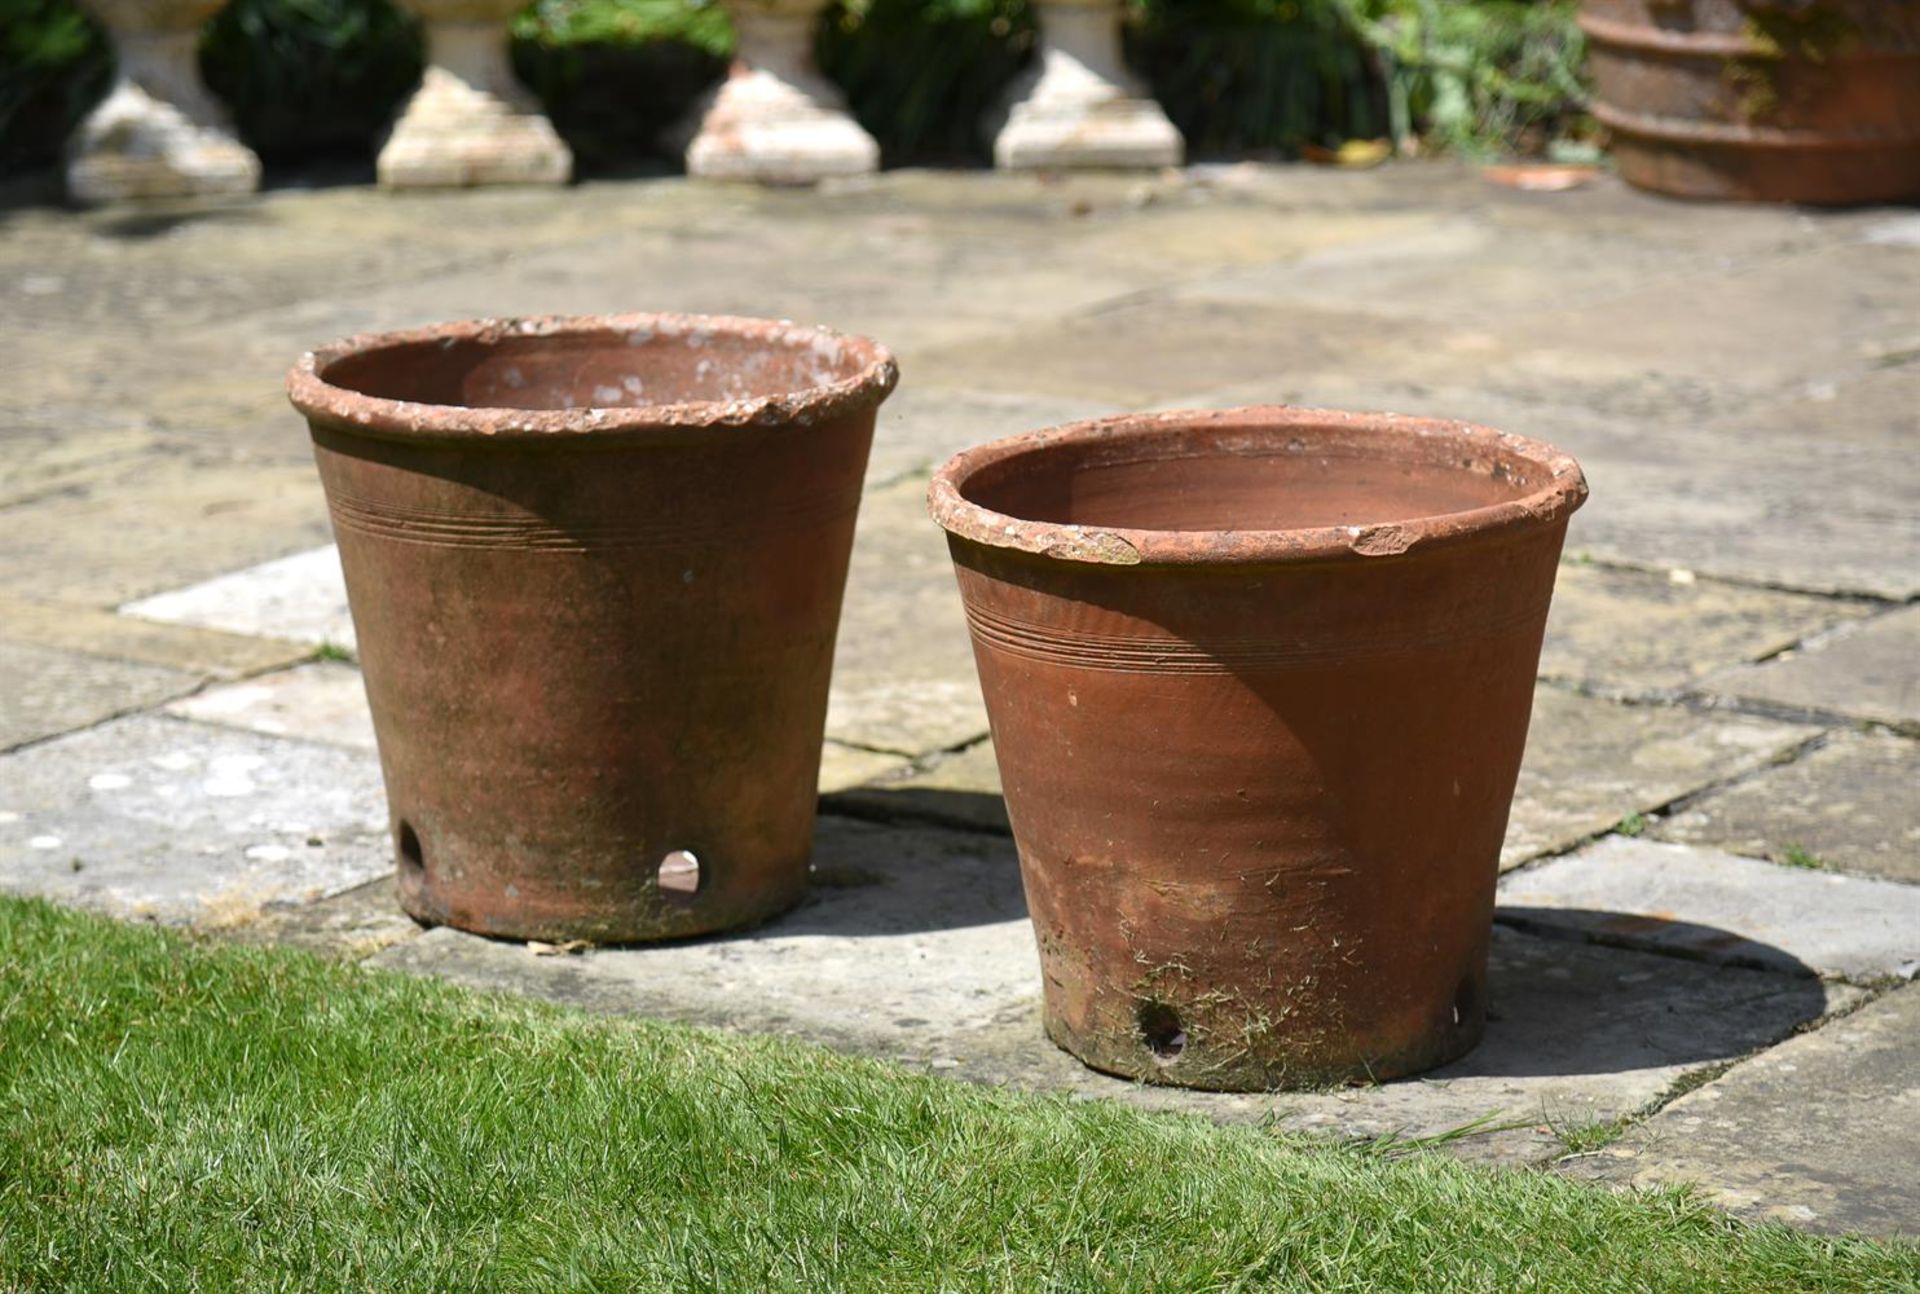 A PAIR OF TERRACOTTA POTS, LATE 19TH OR EARLY 20TH CENTURY - Image 2 of 2